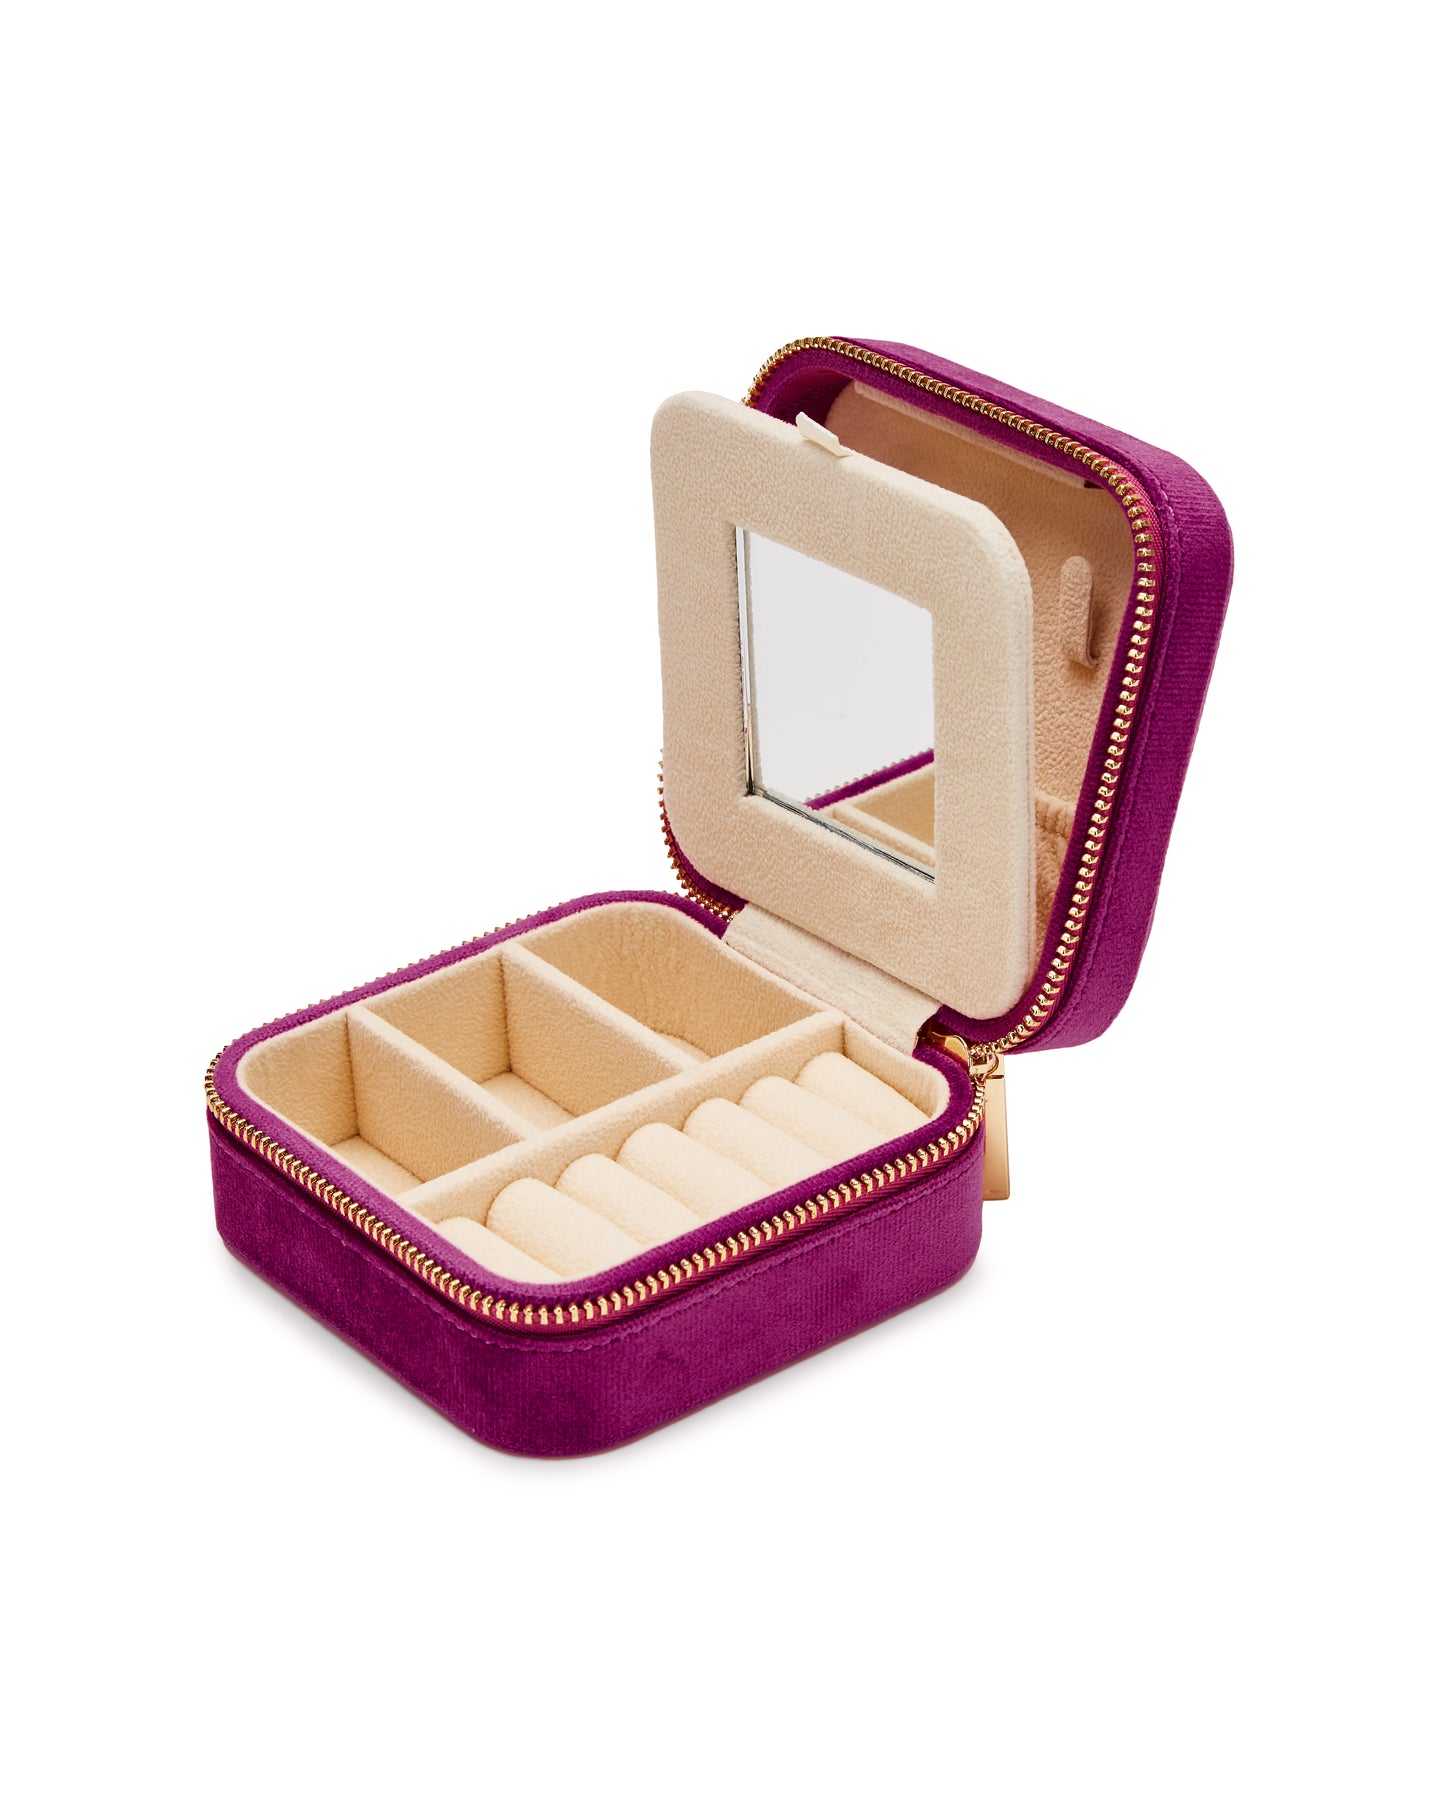 VELVET JEWELRY BOX col. wild berry, directly orderable - 5 pieces